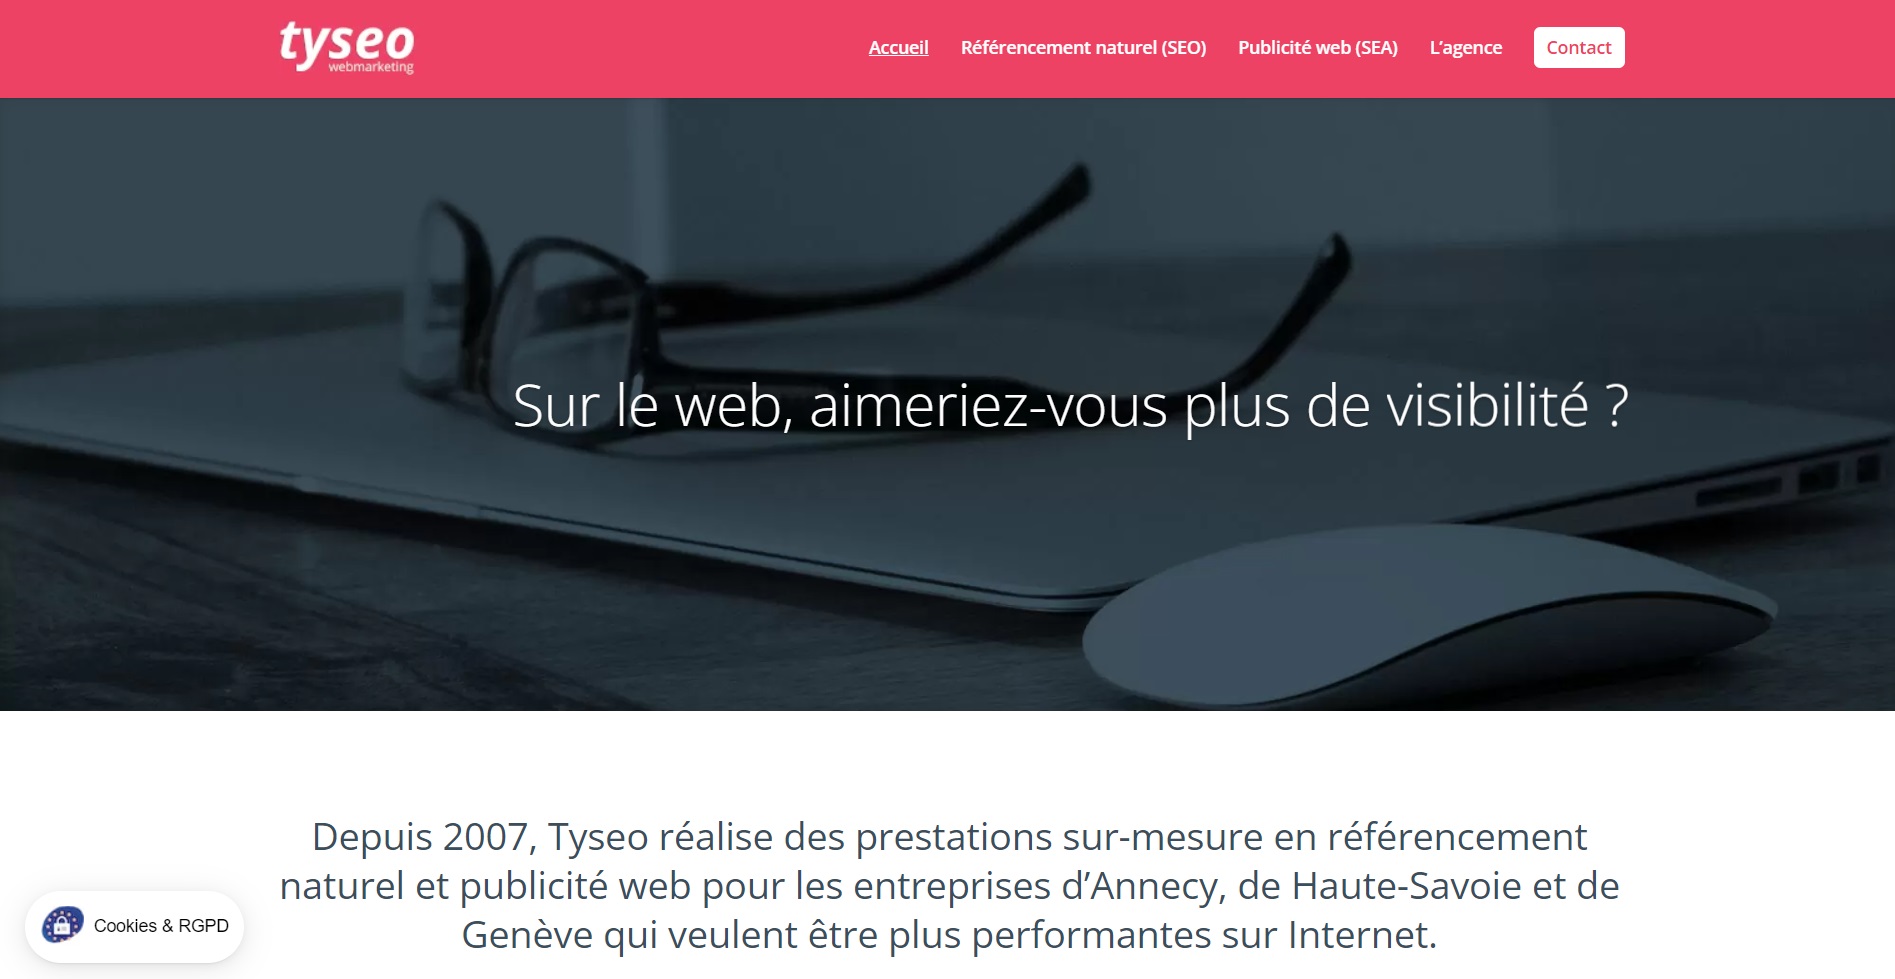  Tyseo - Agence Web à Annecy